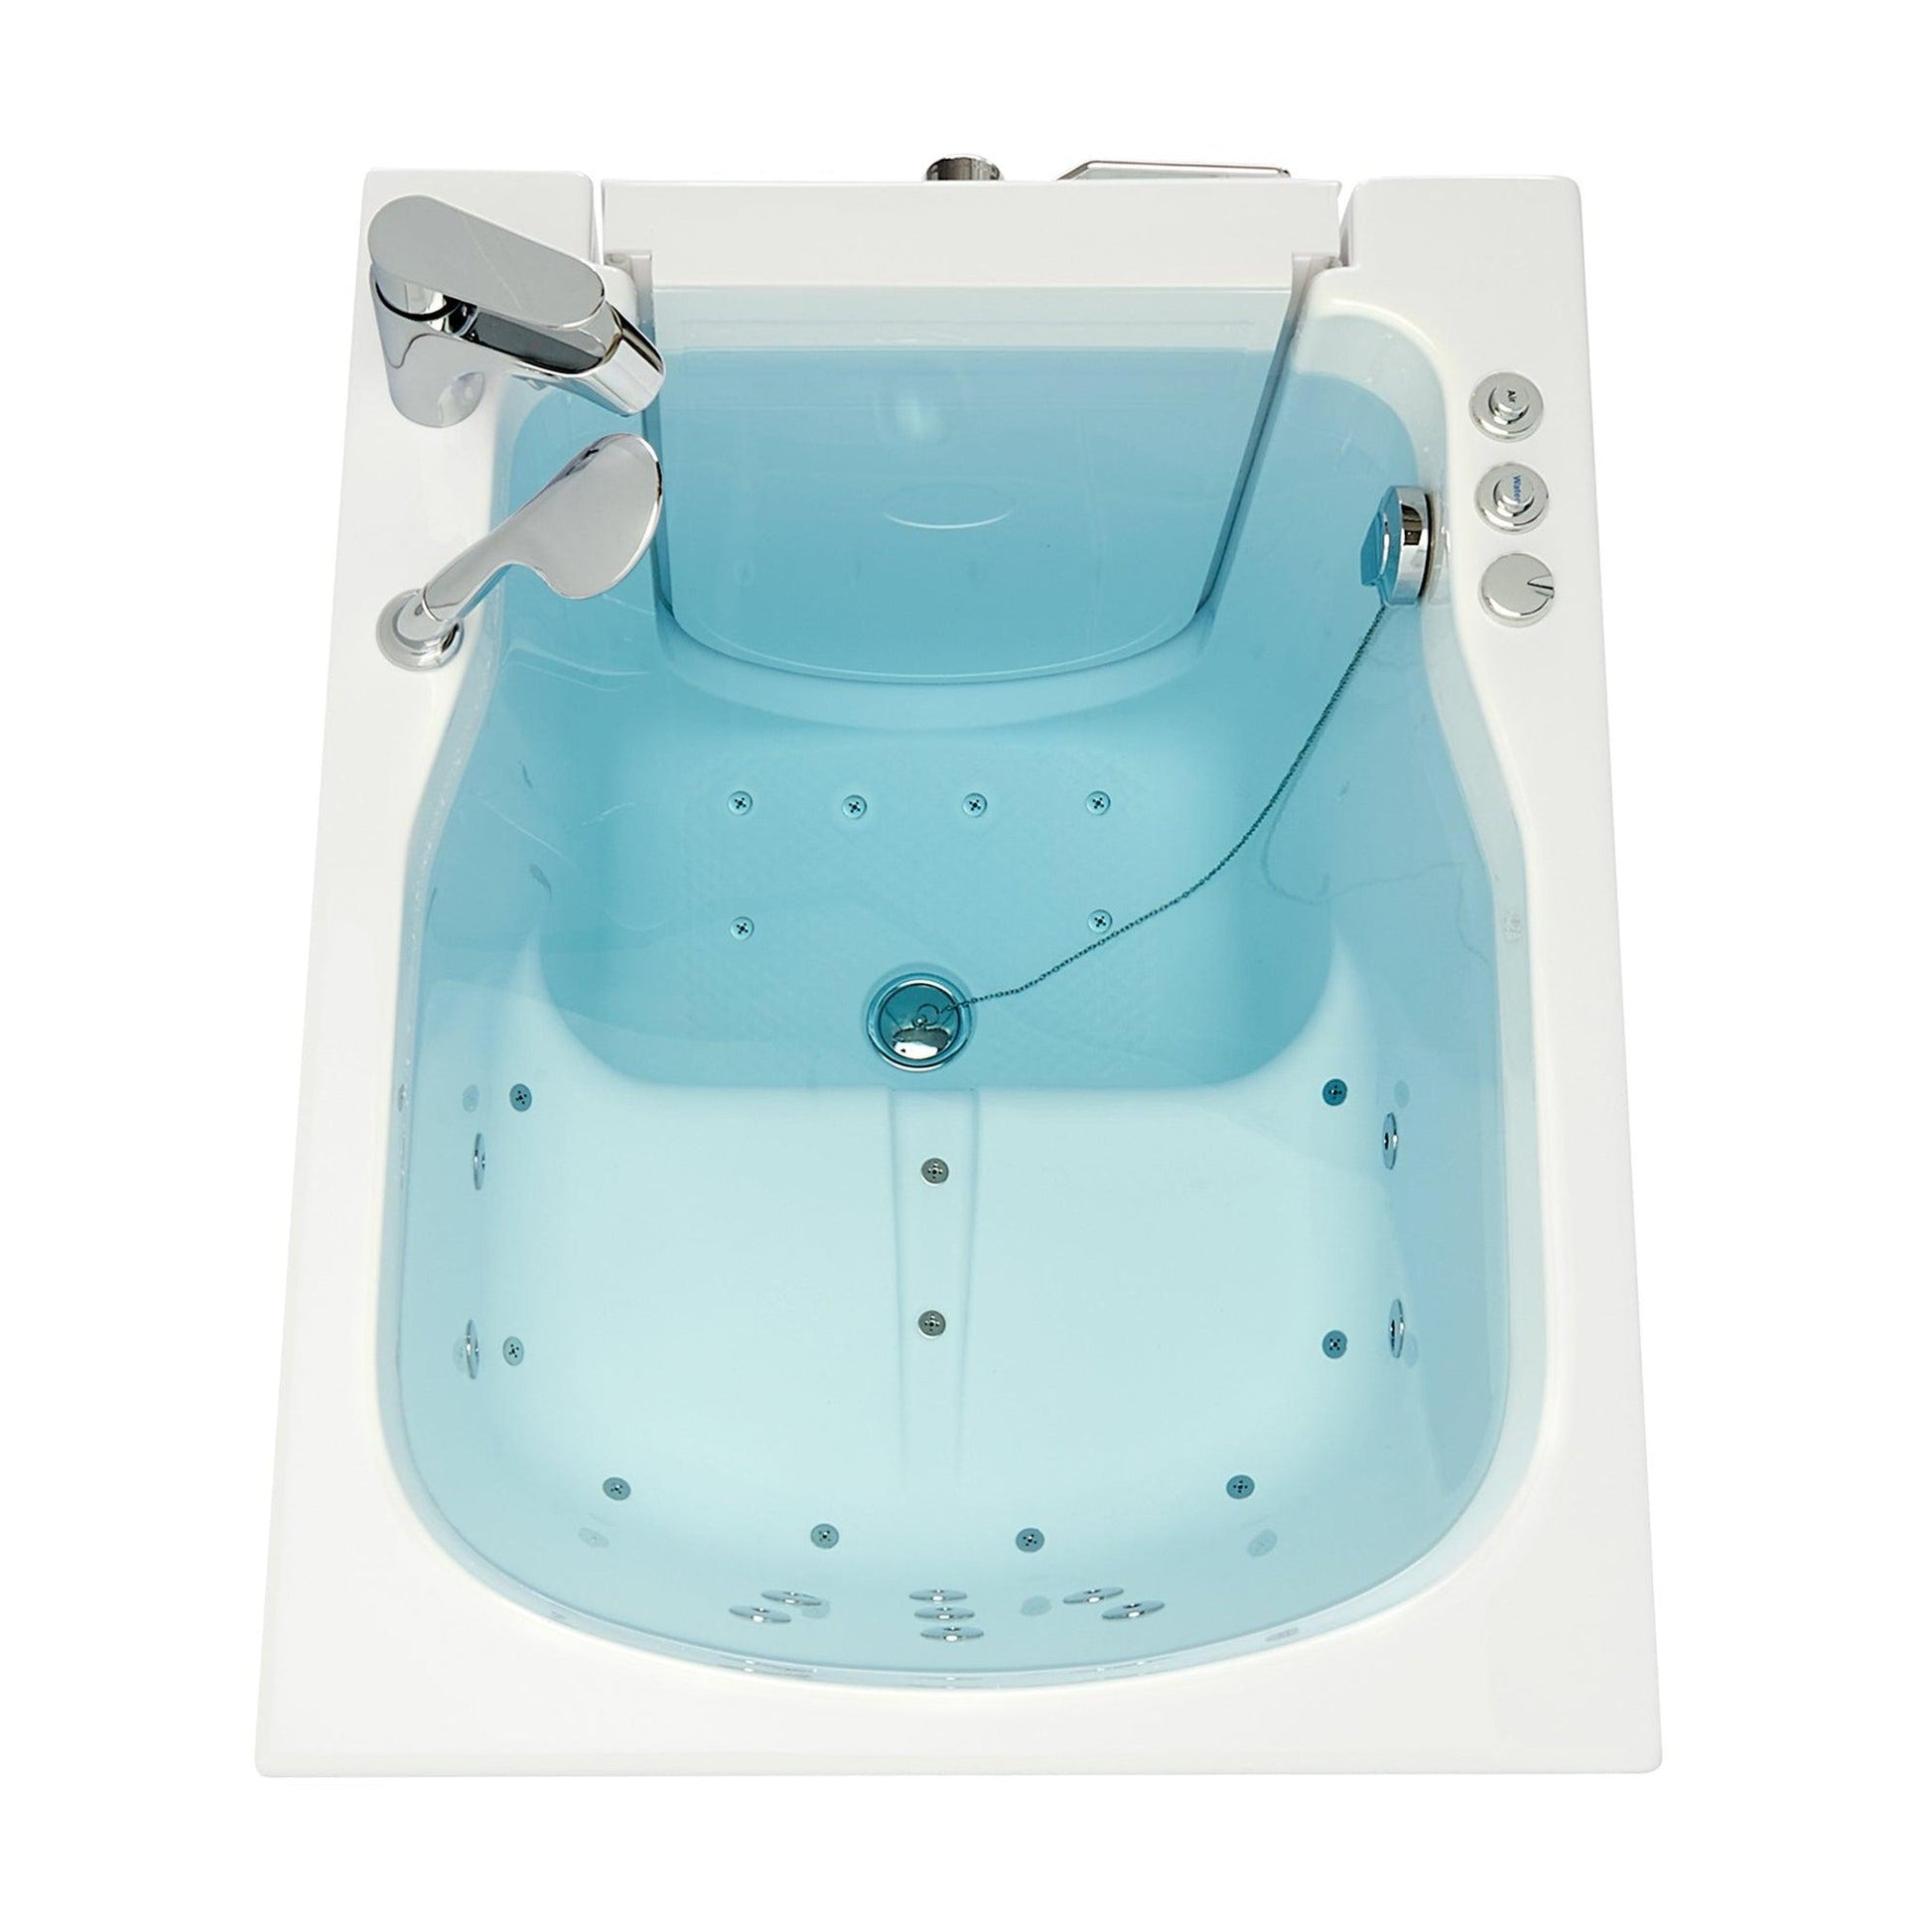 Ella's Bubbles Front Entry 32" x 40" White Acrylic Air and Hydro Massage Walk-In Bathtub With 2 Piece Fast Fill Faucet, 2" Dual Drain and Left Outward Swing Door